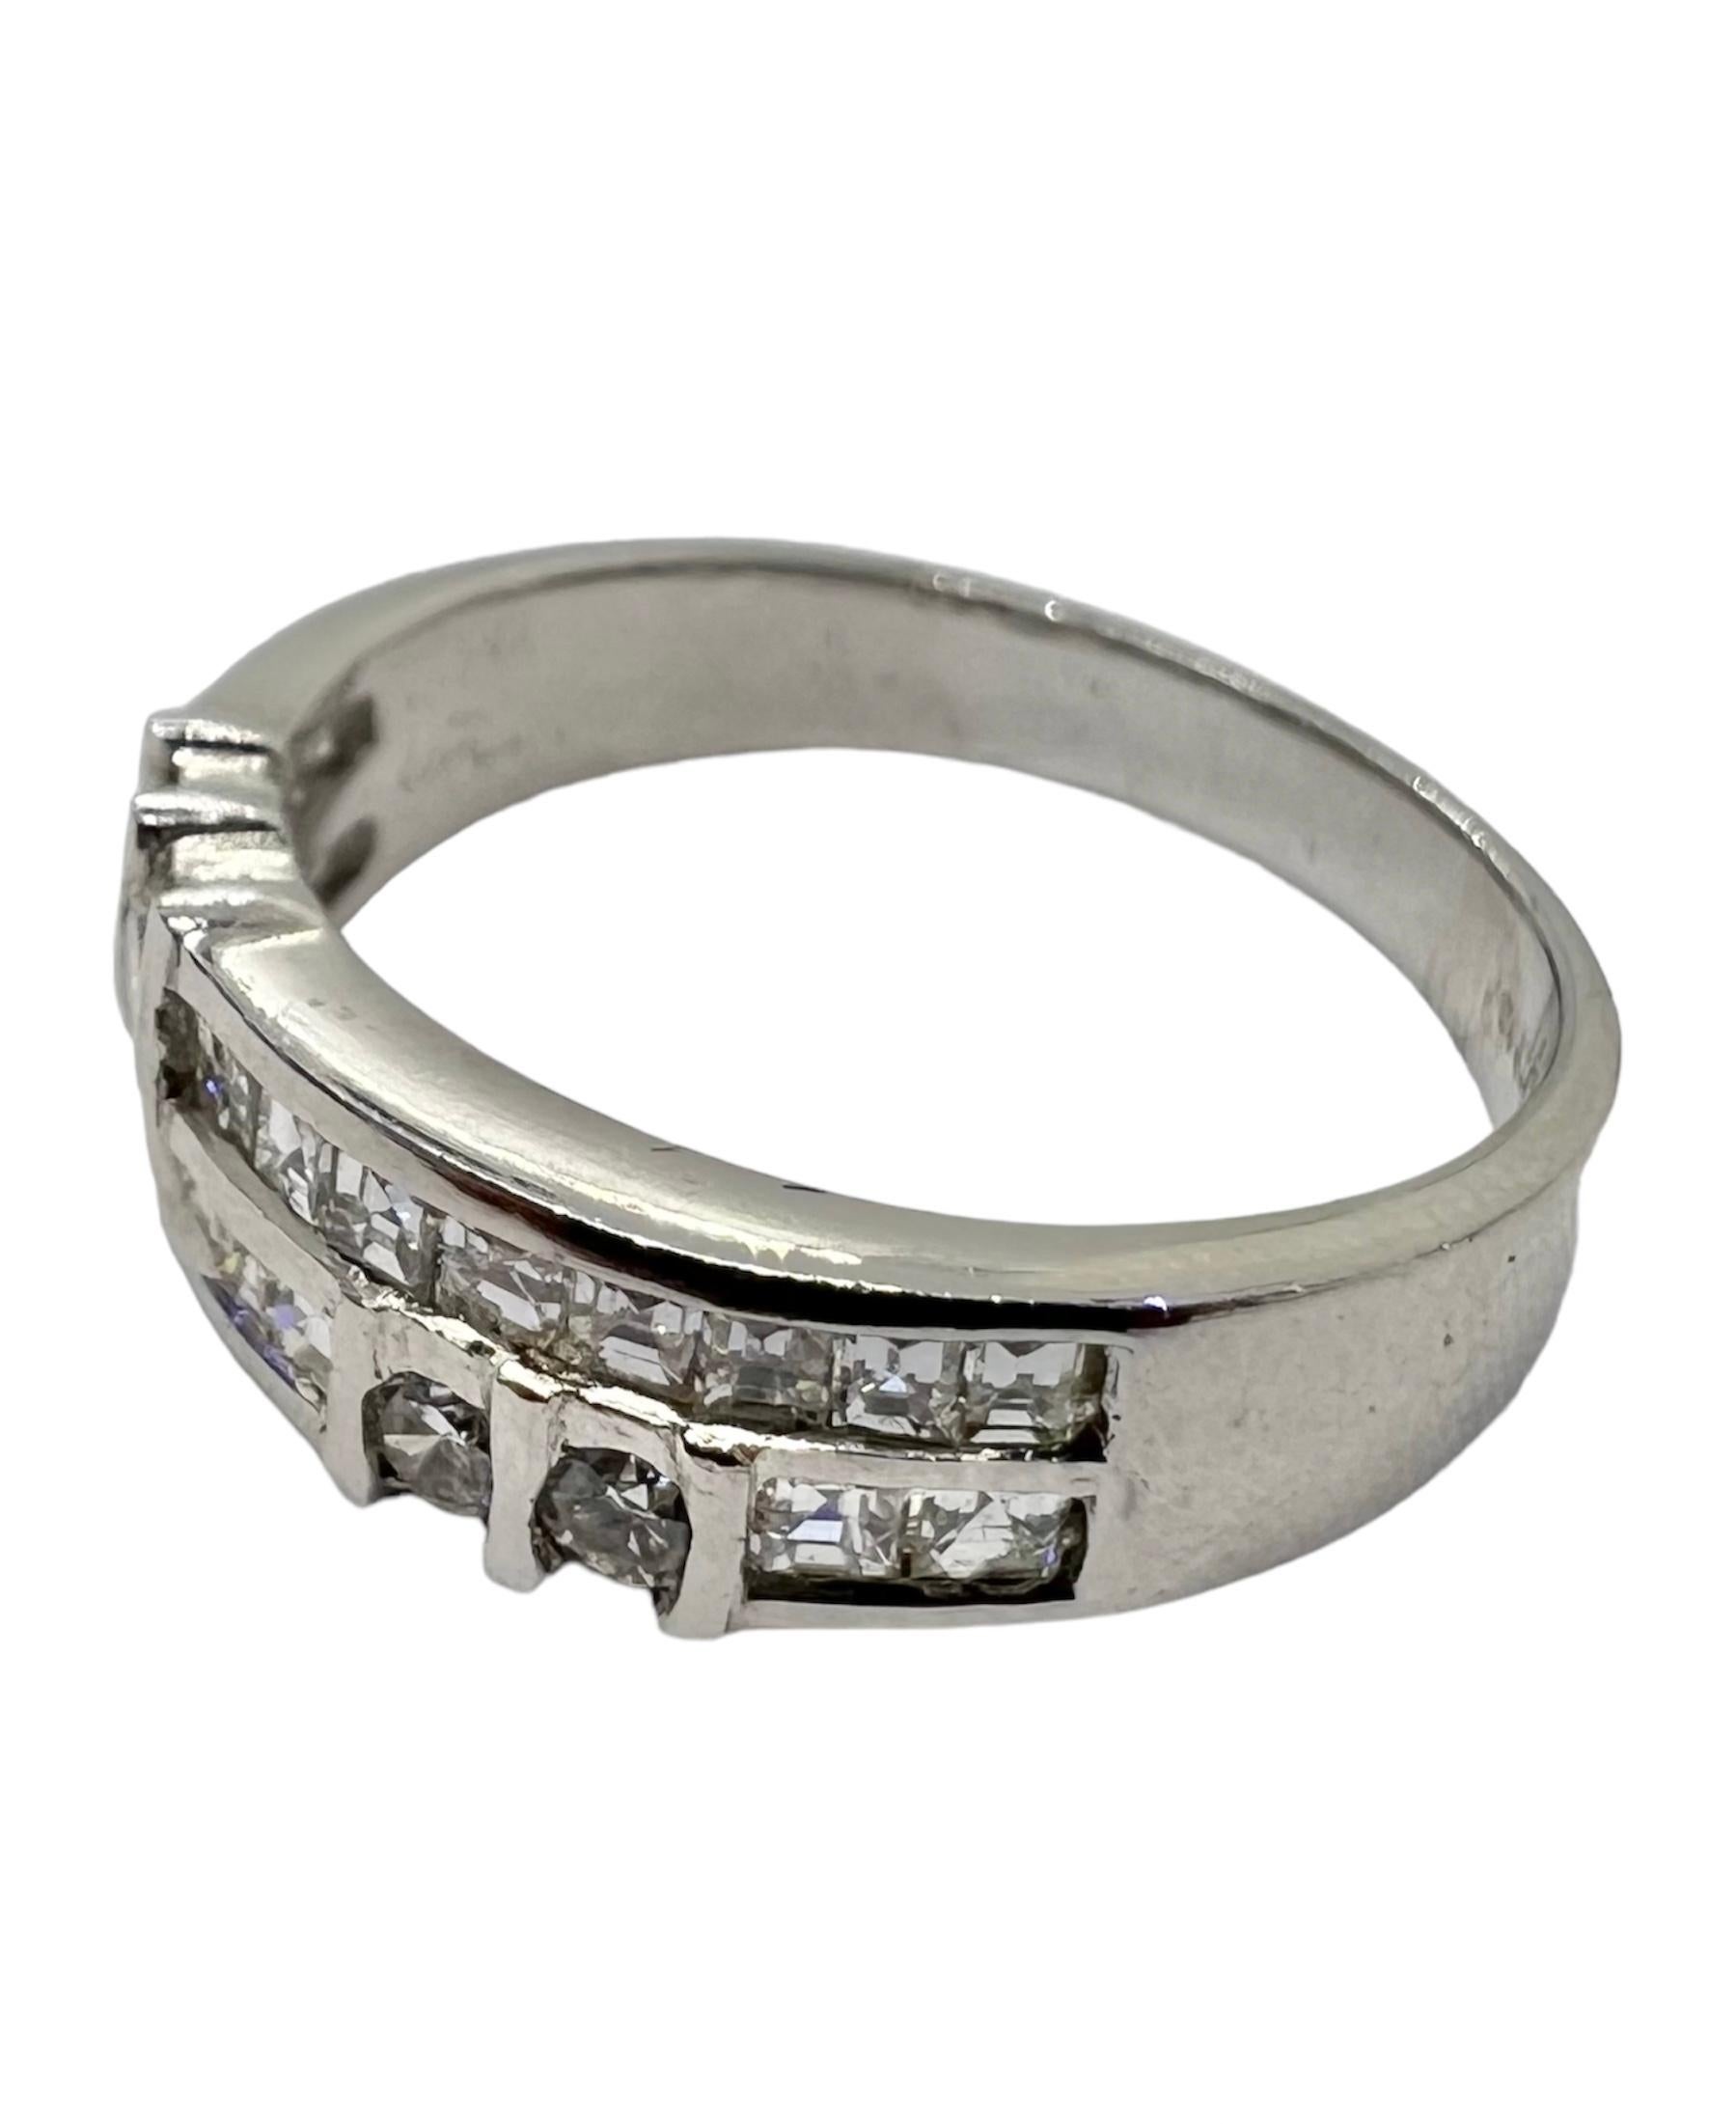 .71 carat square cut diamonds and round diamonds set in platinum.

Sophia D by Joseph Dardashti LTD has been known worldwide for 35 years and are inspired by classic Art Deco design that merges with modern manufacturing techniques.